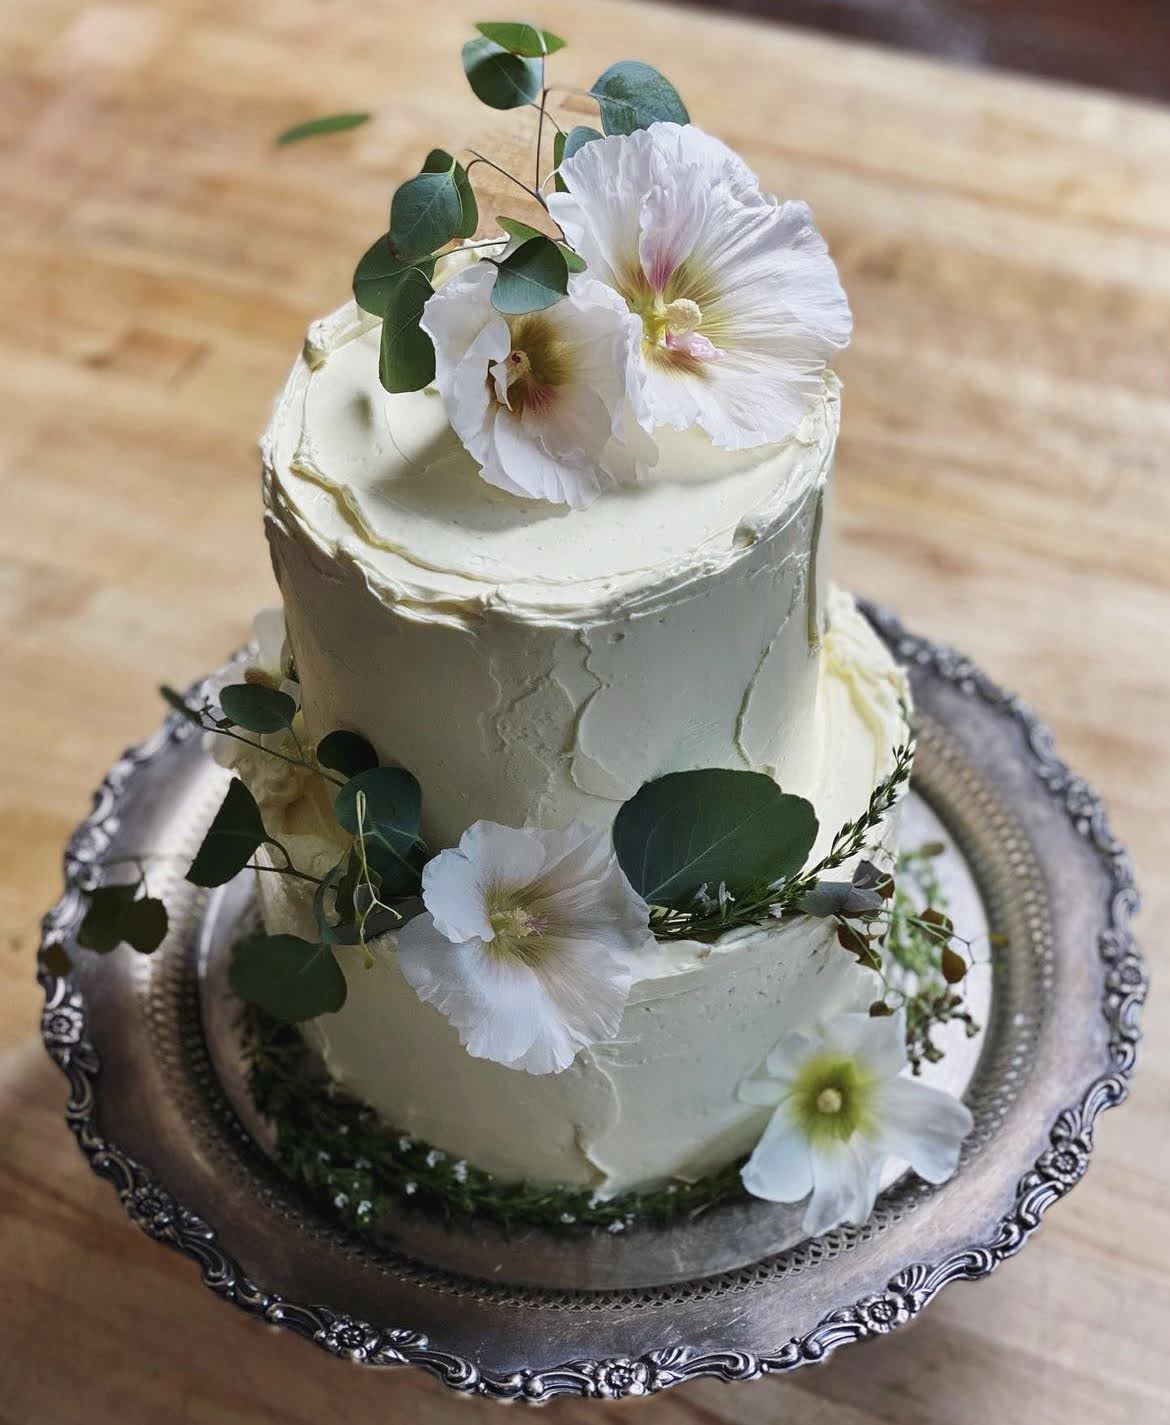 A two-tier wedding cake decorated with white flowers